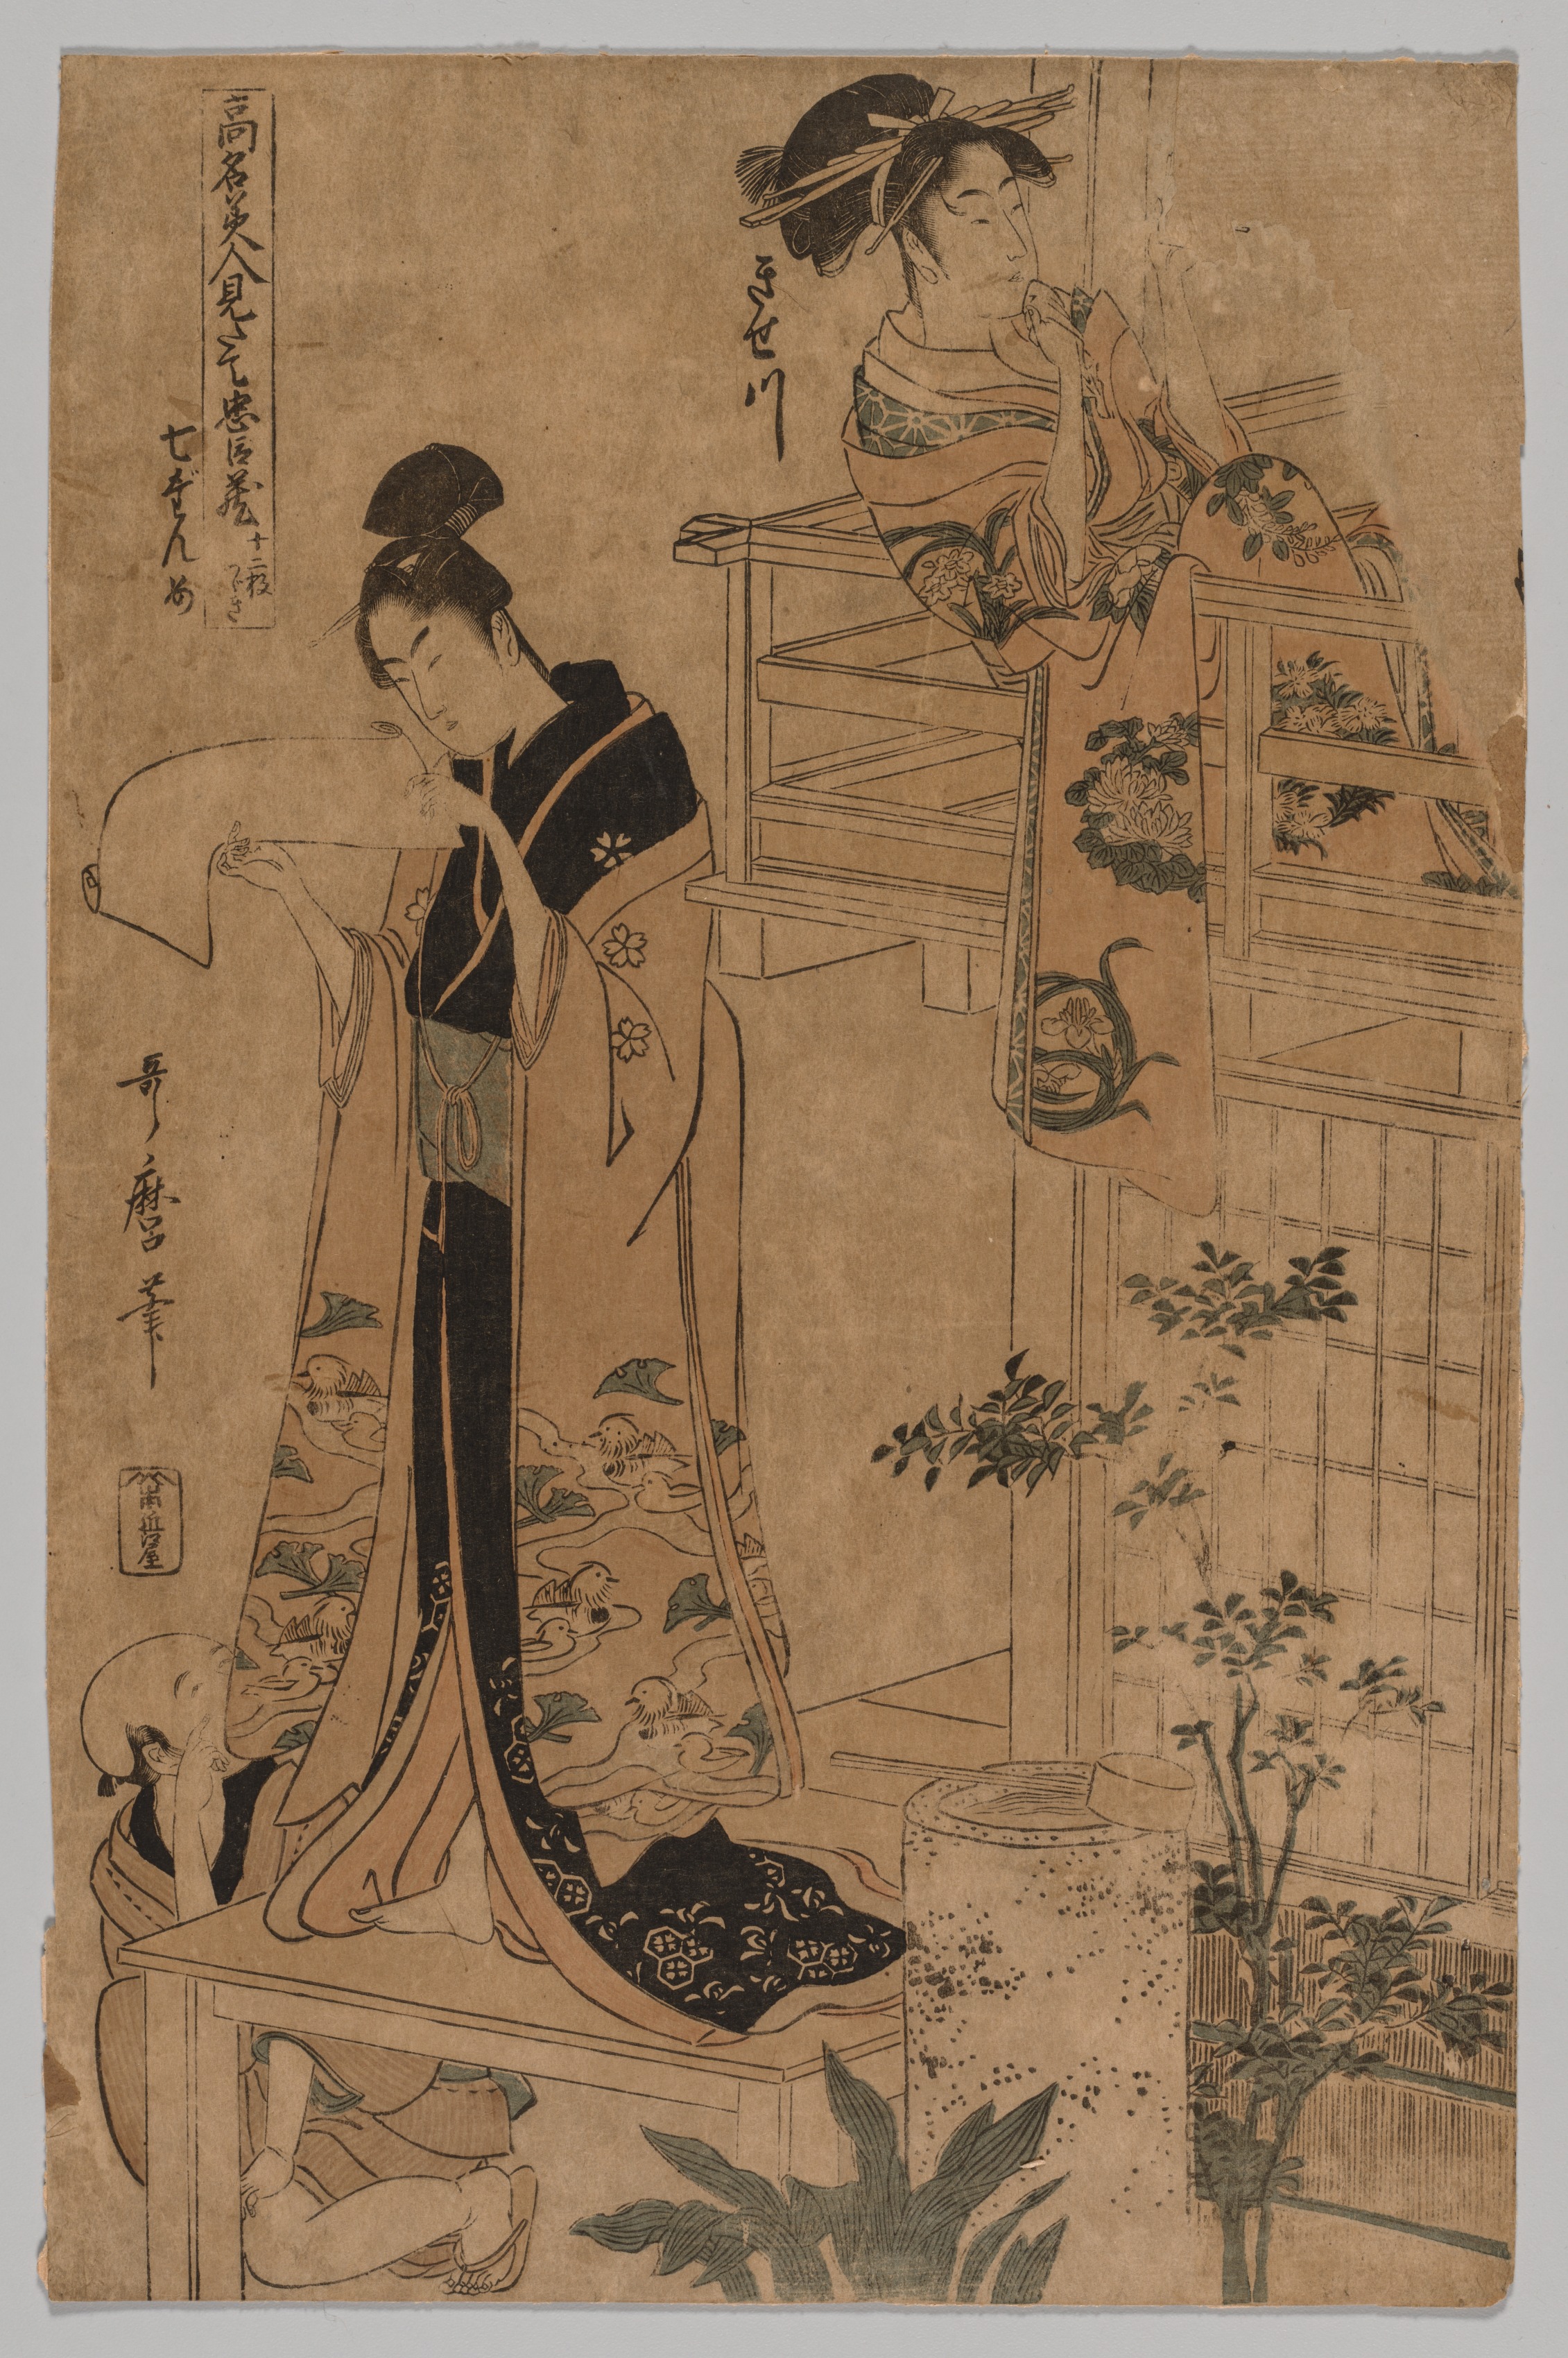 Act VII from the series The Storehouse of Loyal Retainers As Portrayed by Famous Beauties in Twelve Leaves